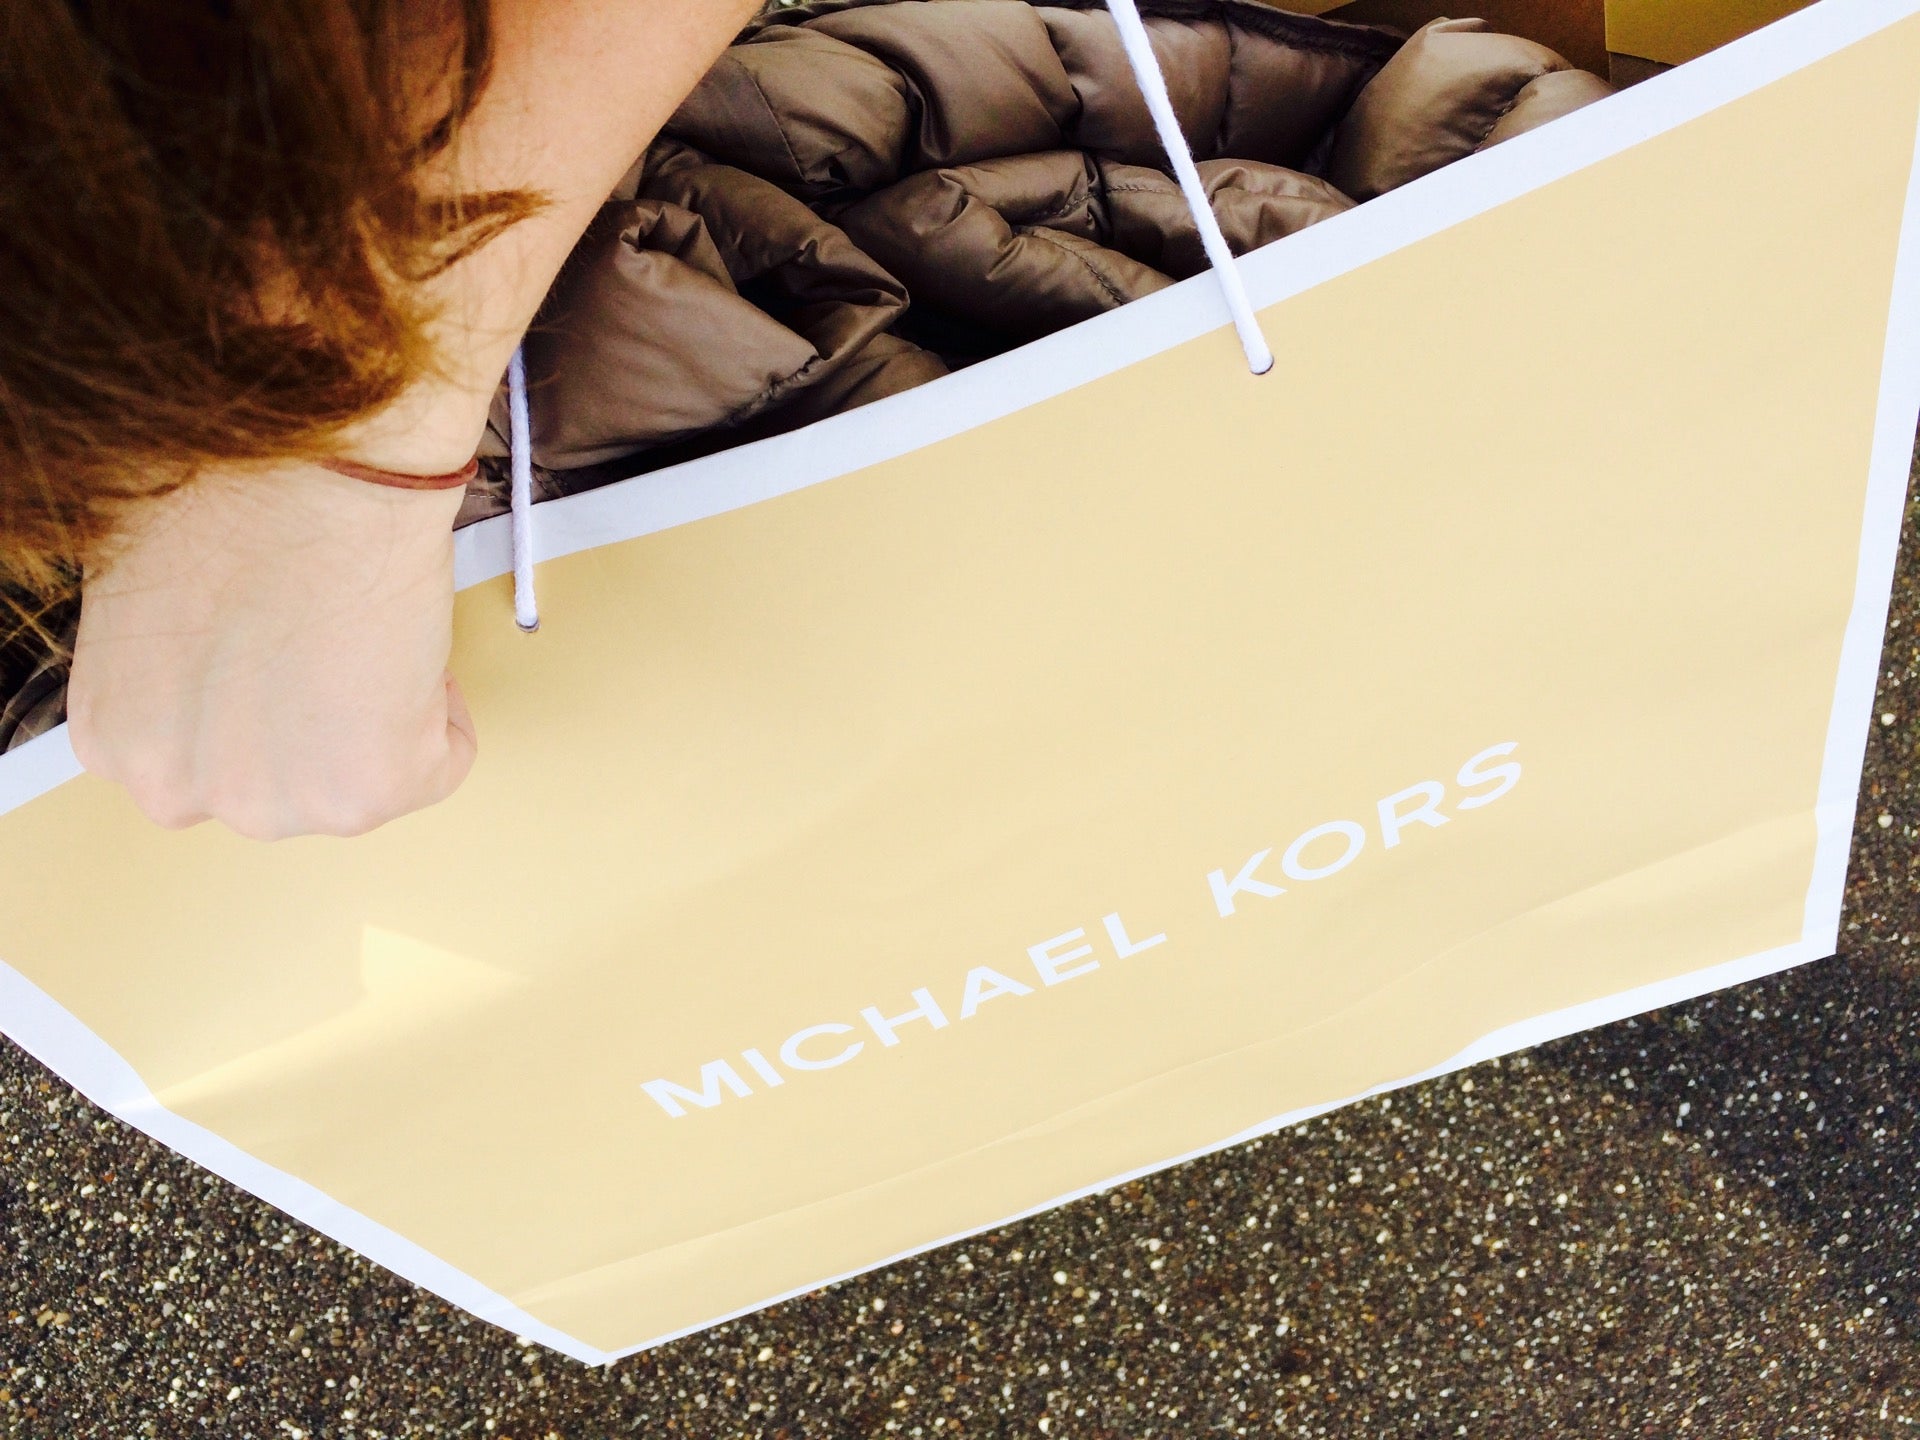 Michael Kors Outlet - Aurora, OH 44202